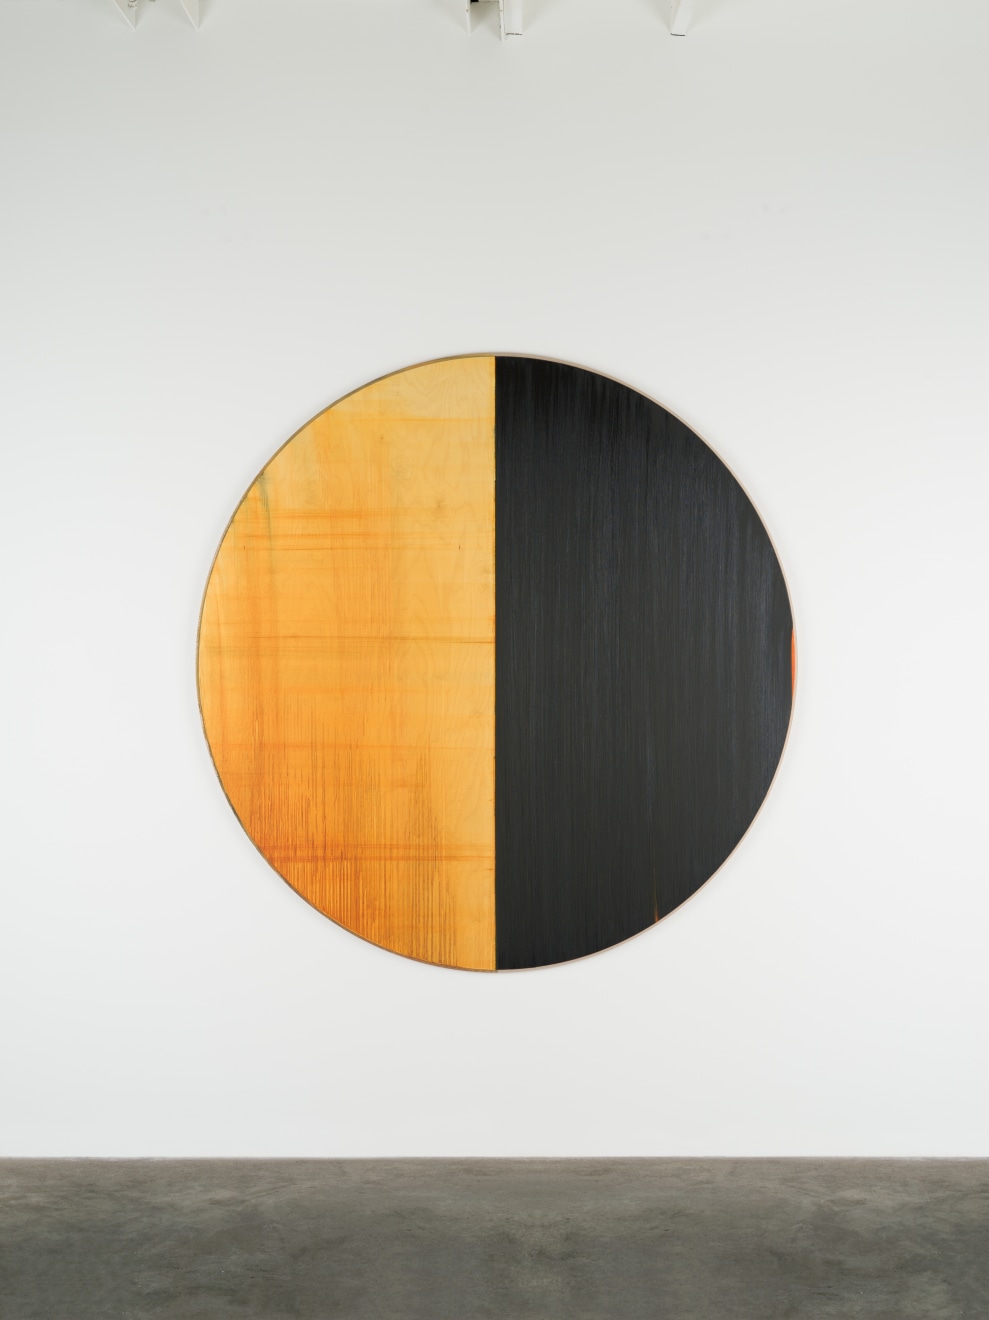 Callum Innes Untitled Lamp Black / Quinacridone Gold, 2022 signed by the artist, verso oil on Birch Ply 70 7/8 x 68 7/8 inches (180 x 175 cm) (CI-TP.38.22)